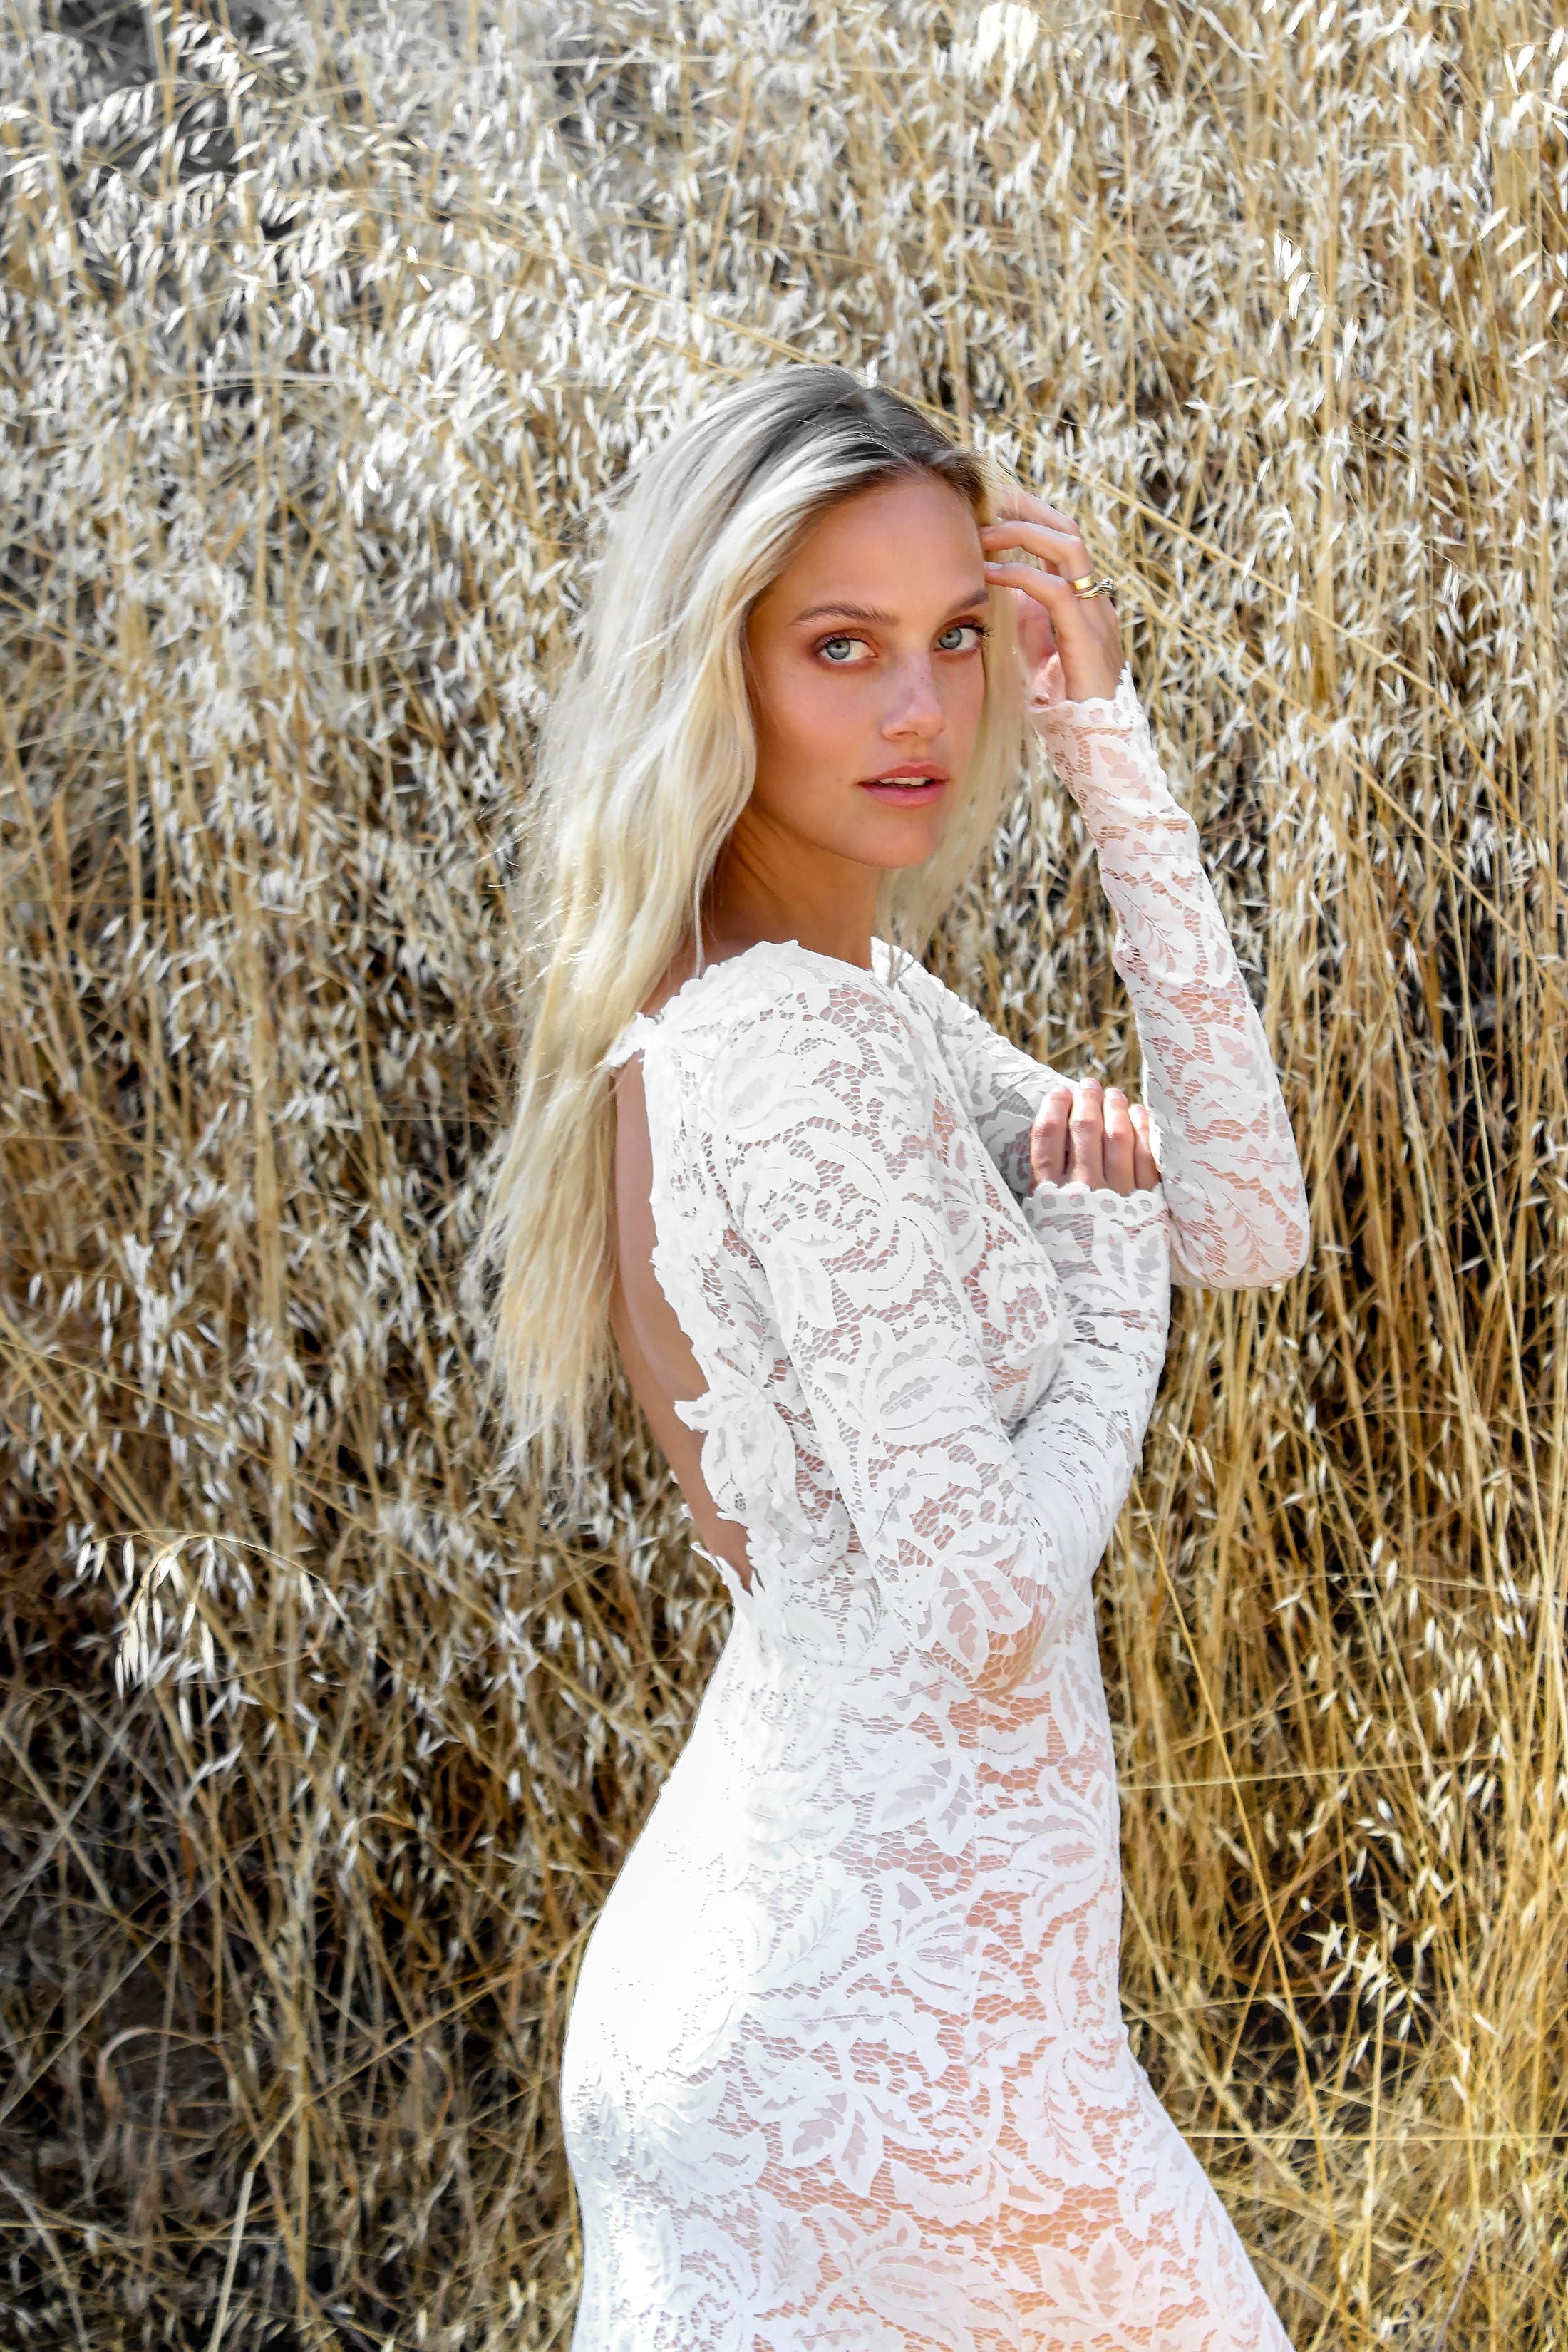 white lace dress with sleeves long